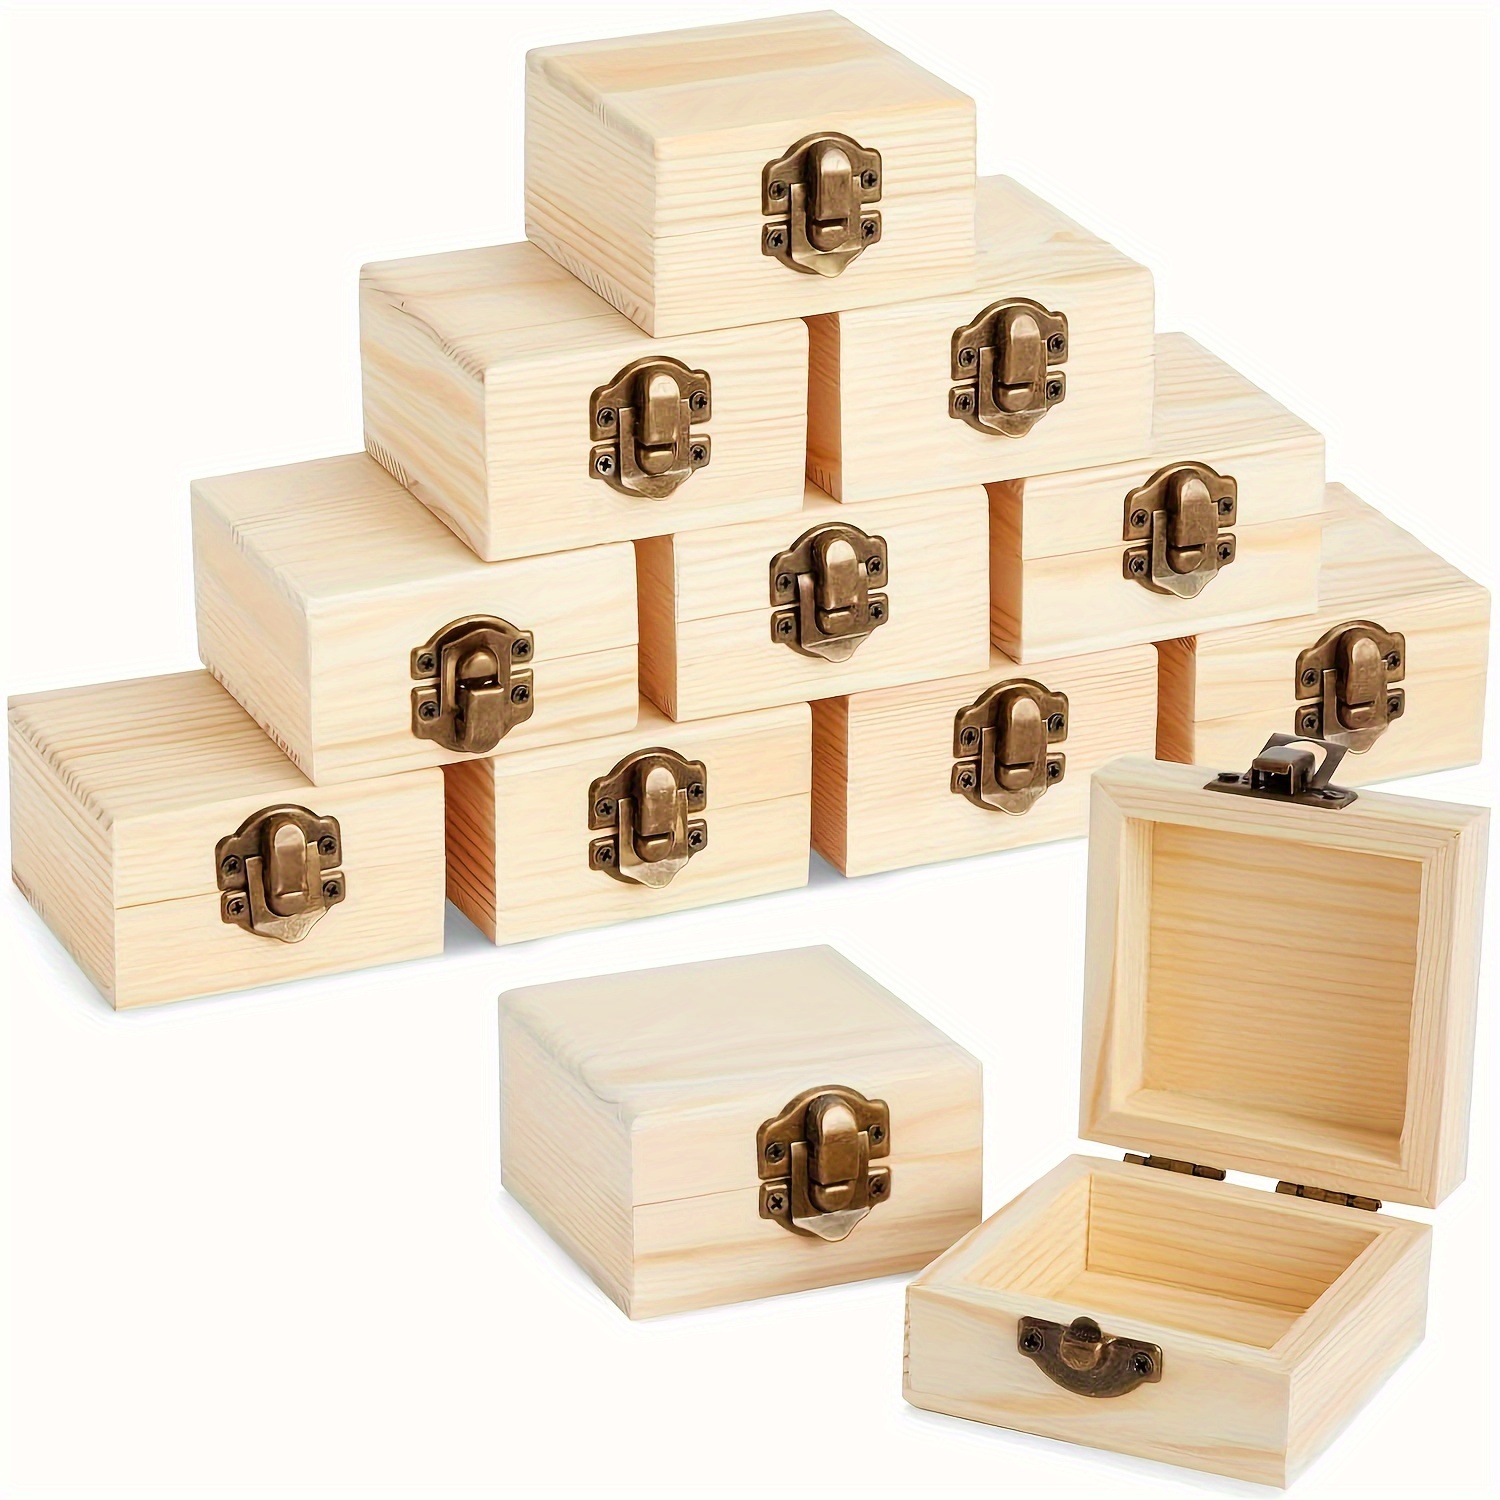 

12pcs Small Unfinished Wooden Boxes For Crafts Supplies, Paintable Wood Treasure Chests For Jewelry And Diy Projects (2.7x2.7x1.6 In)